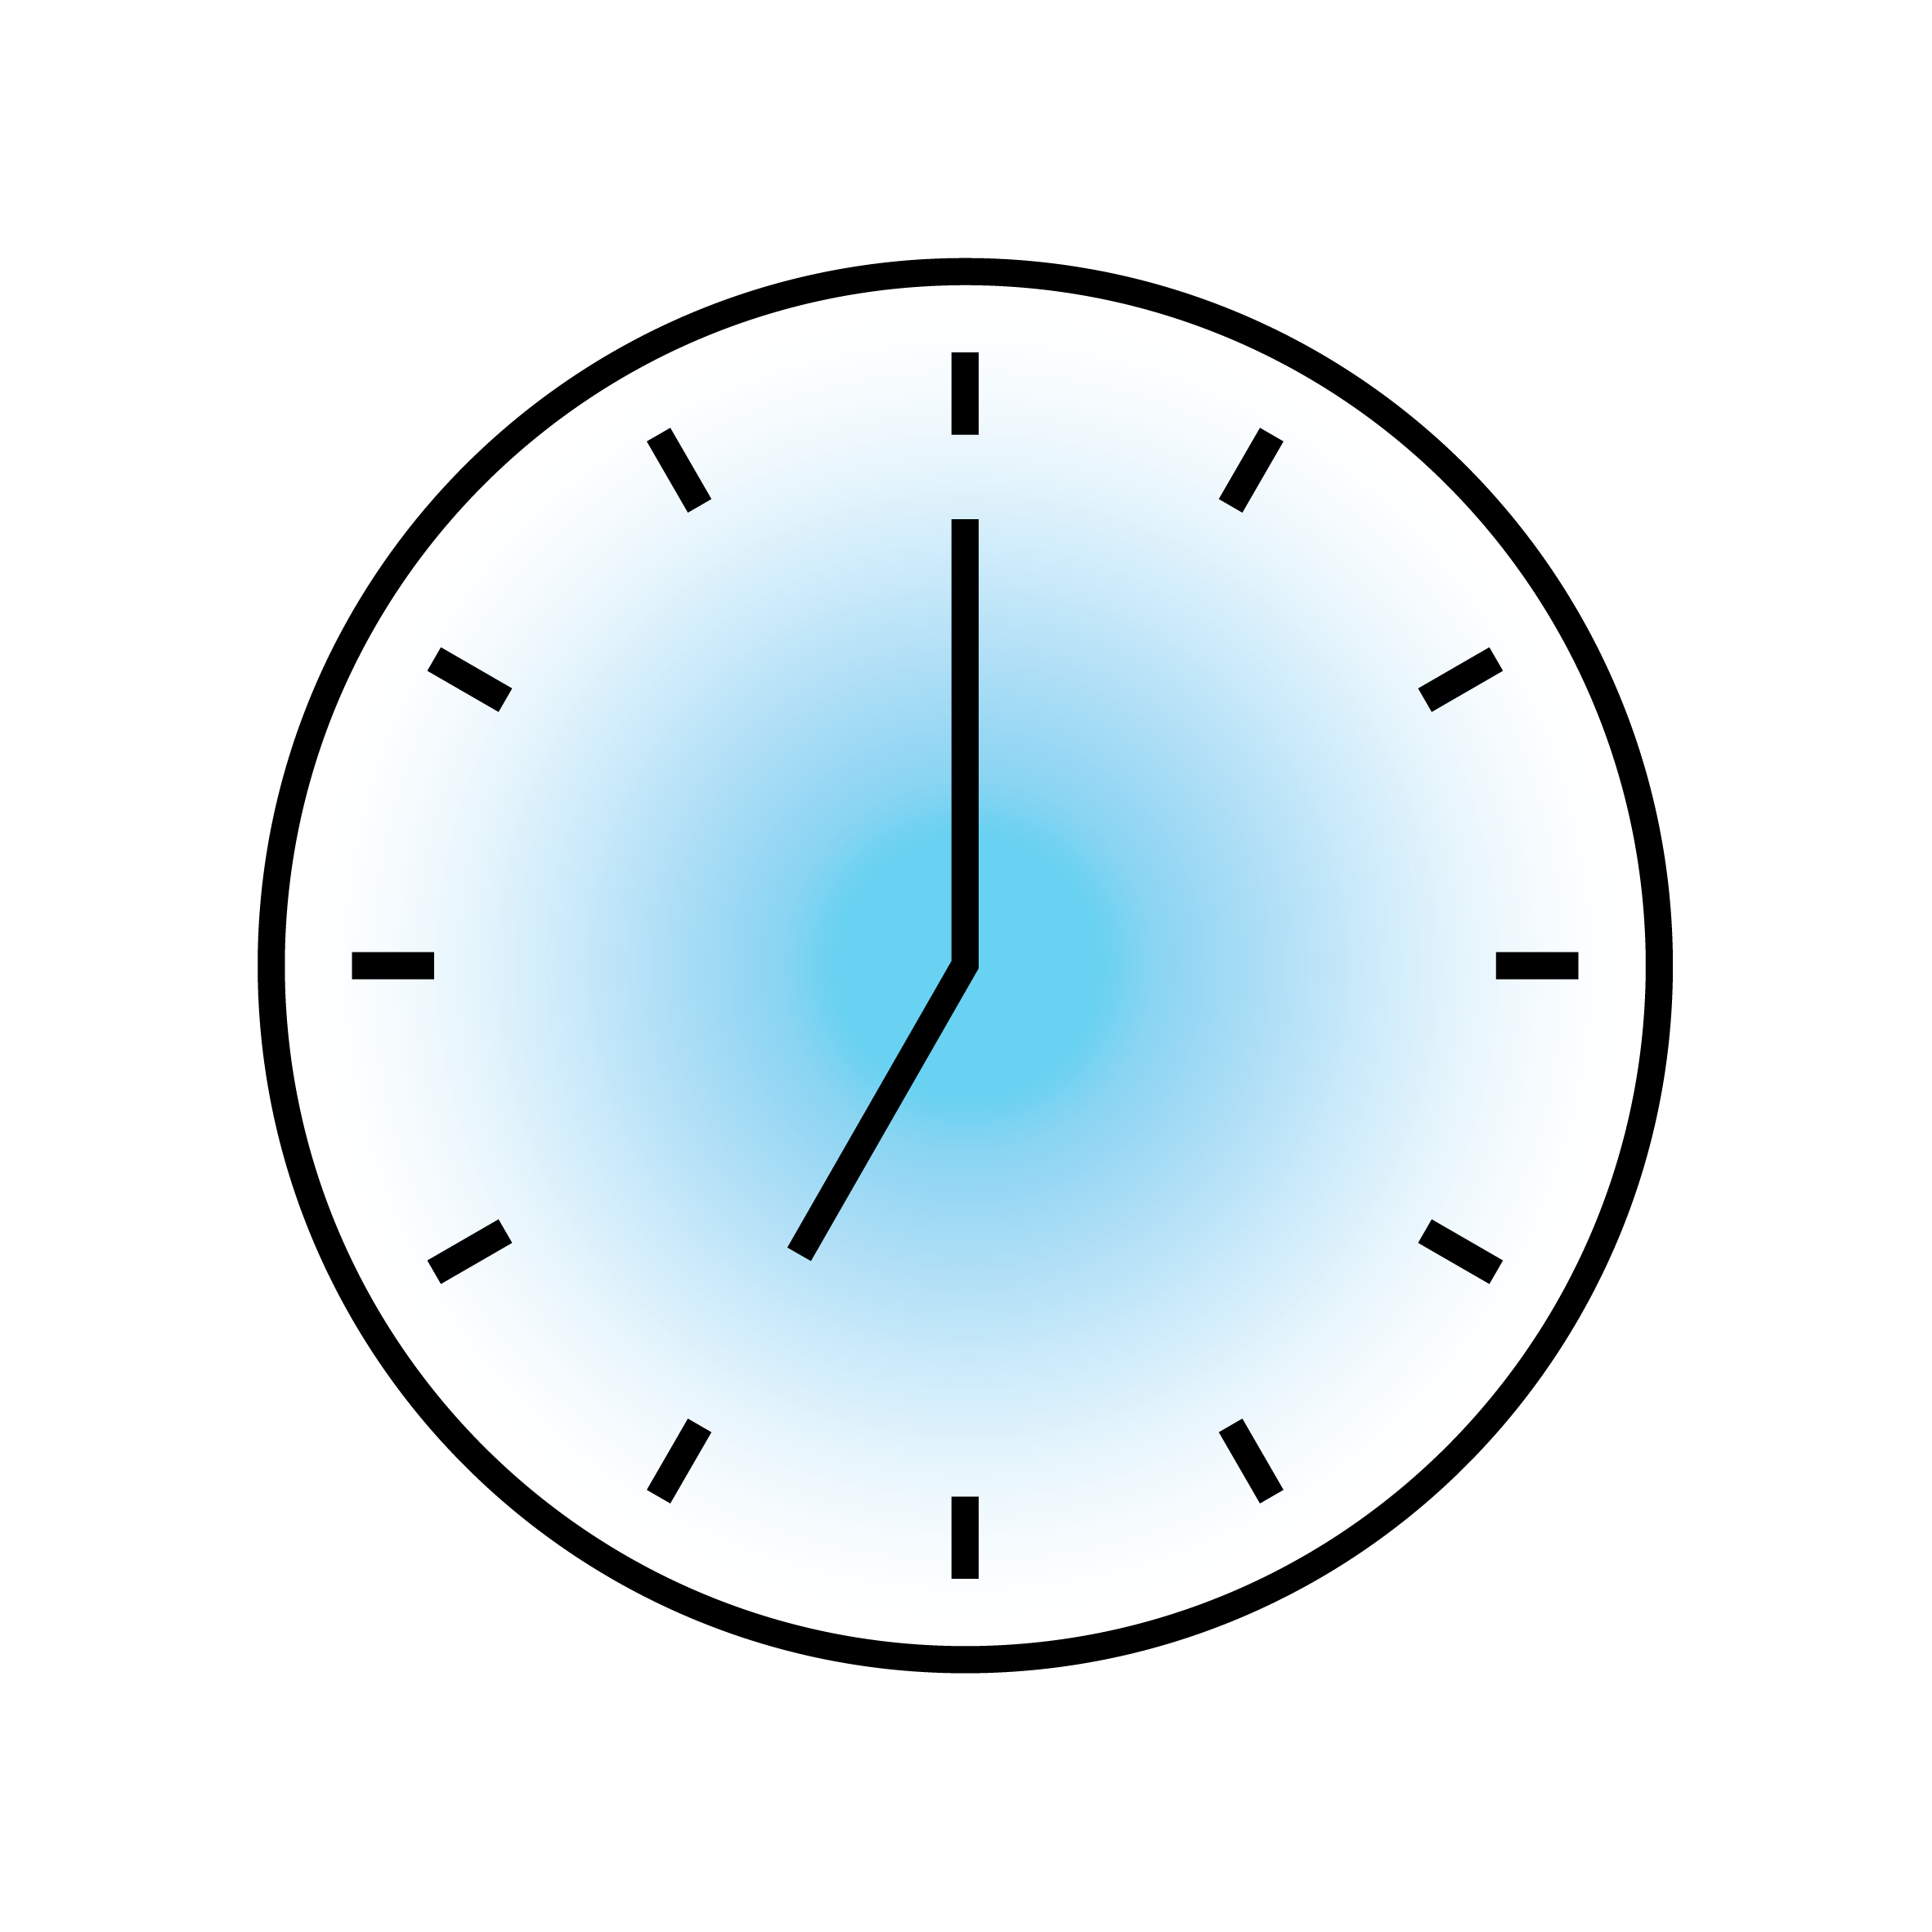 Alt text: "Vector graphic of a simple analogue clock with a blue dial showing 10:10."